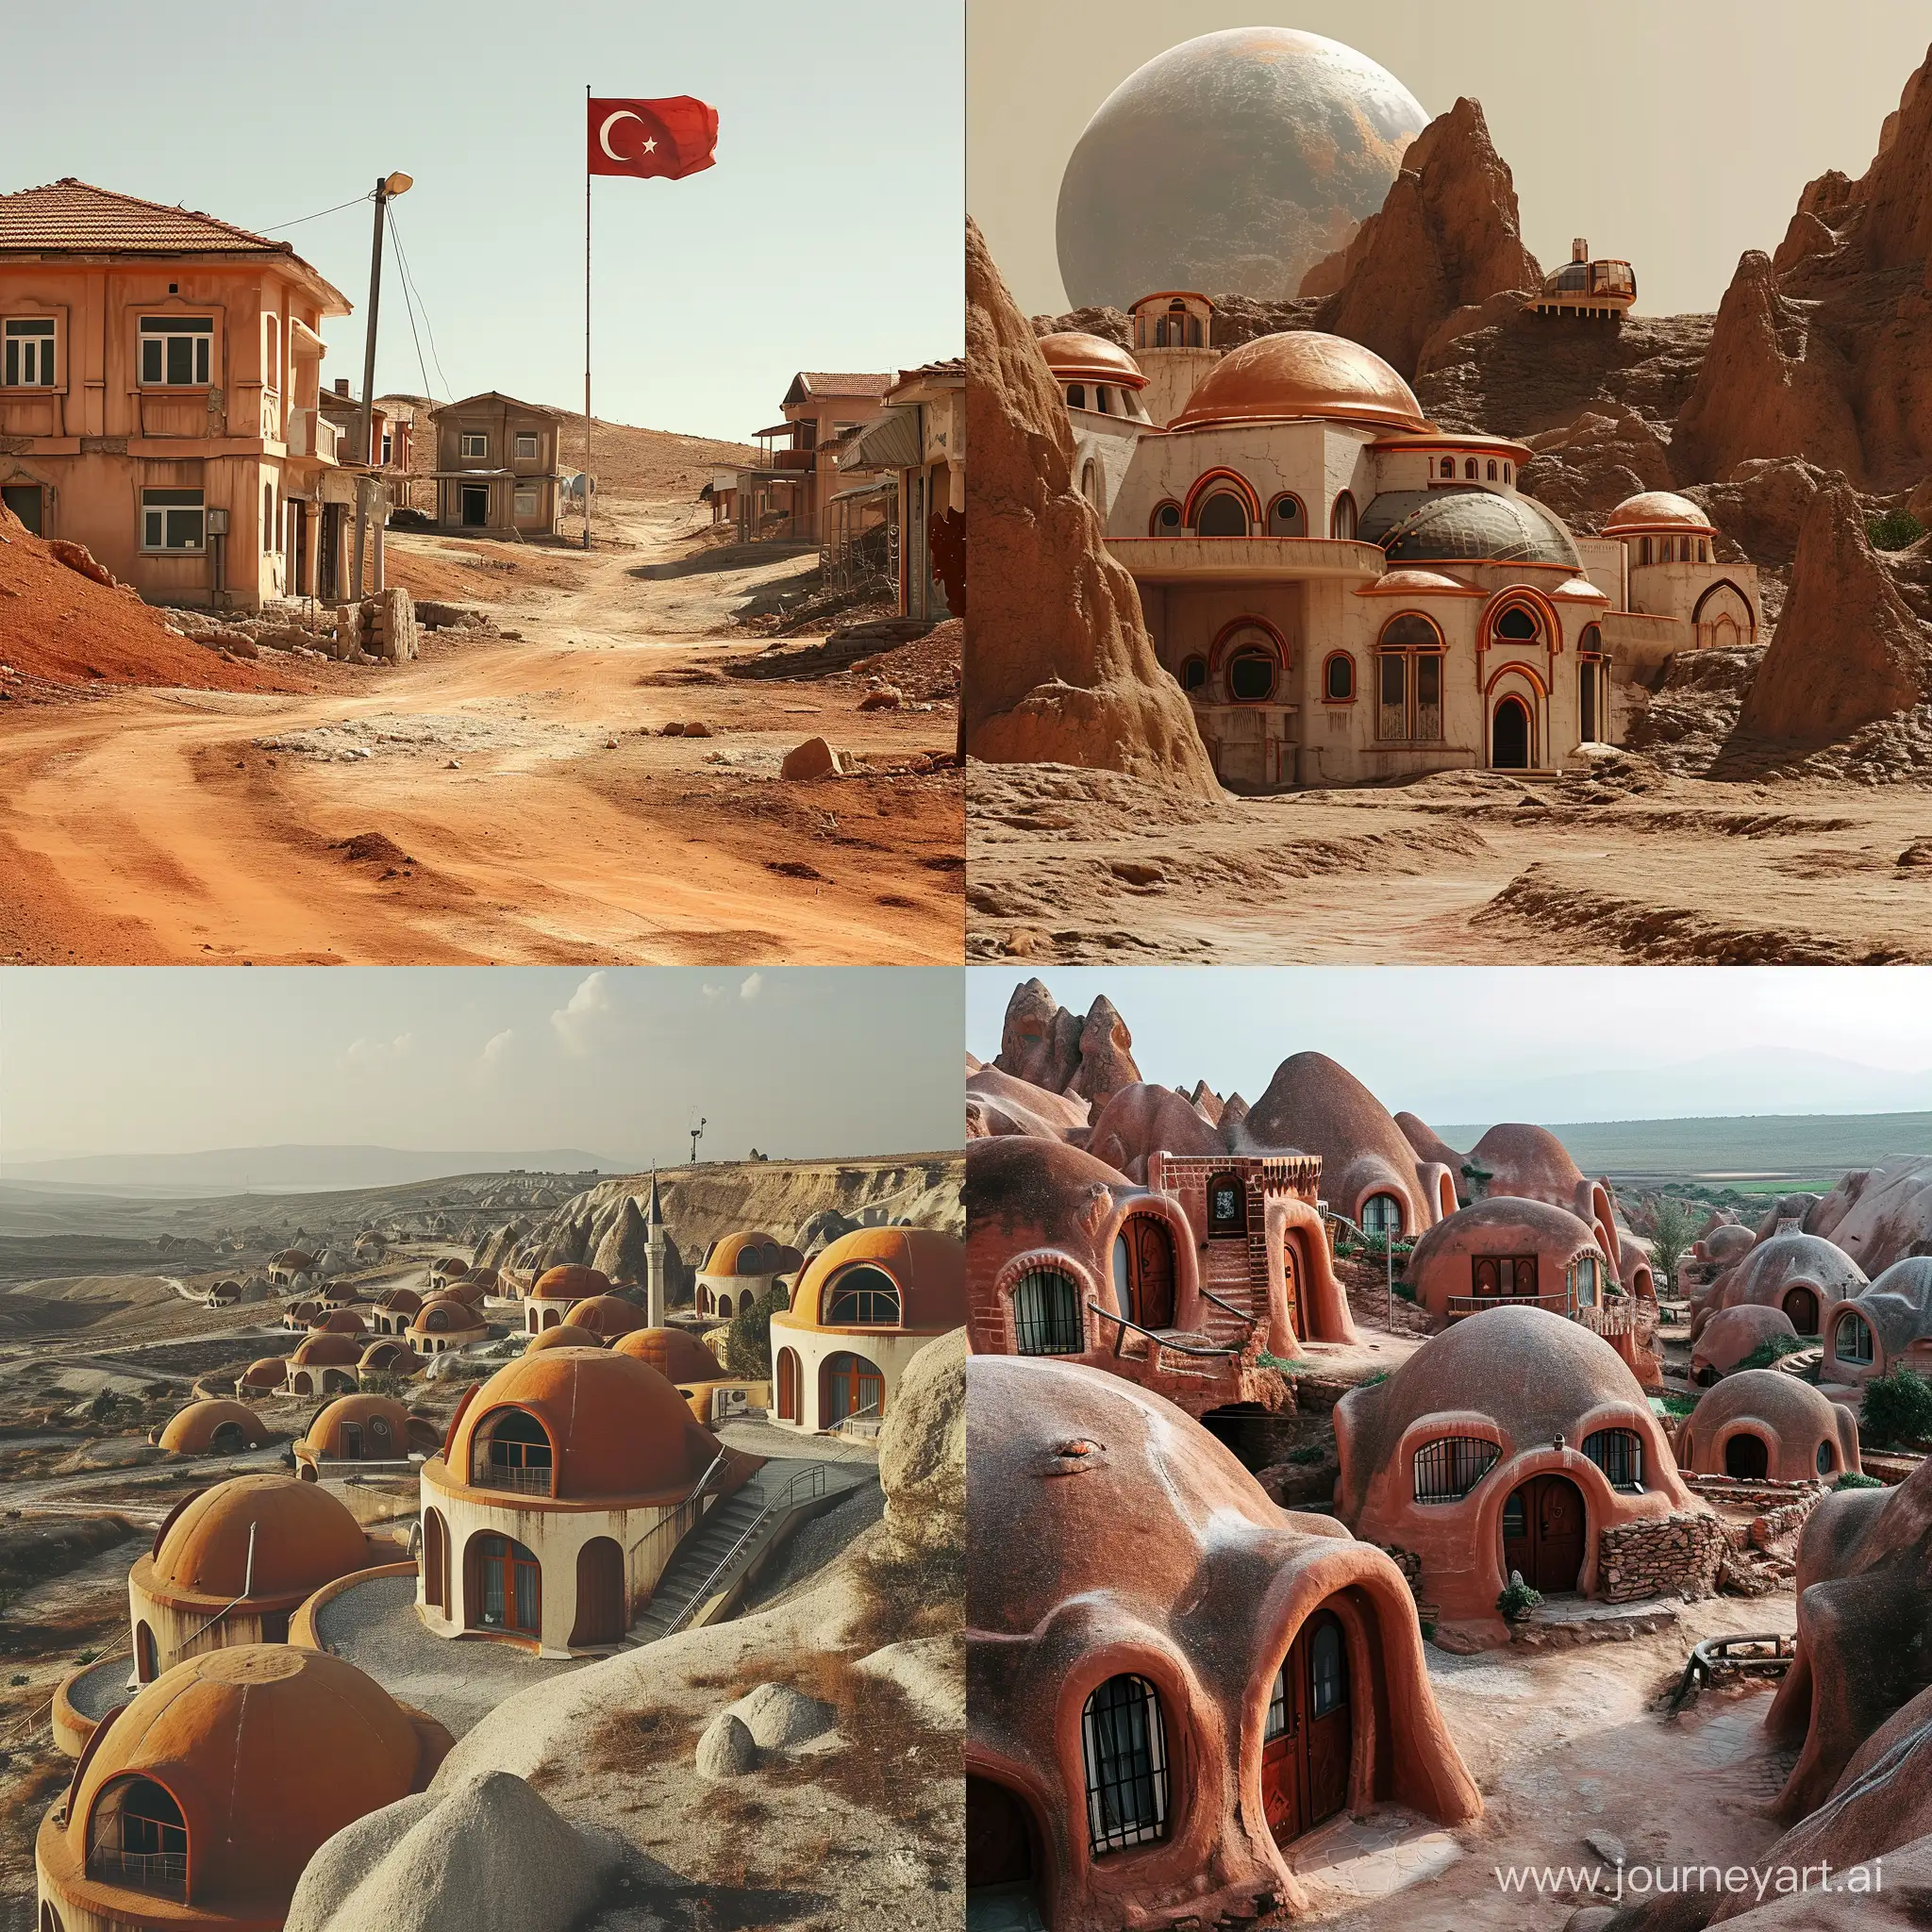 Turkish-Houses-on-Mars-Extraterrestrial-Architecture-Exploration